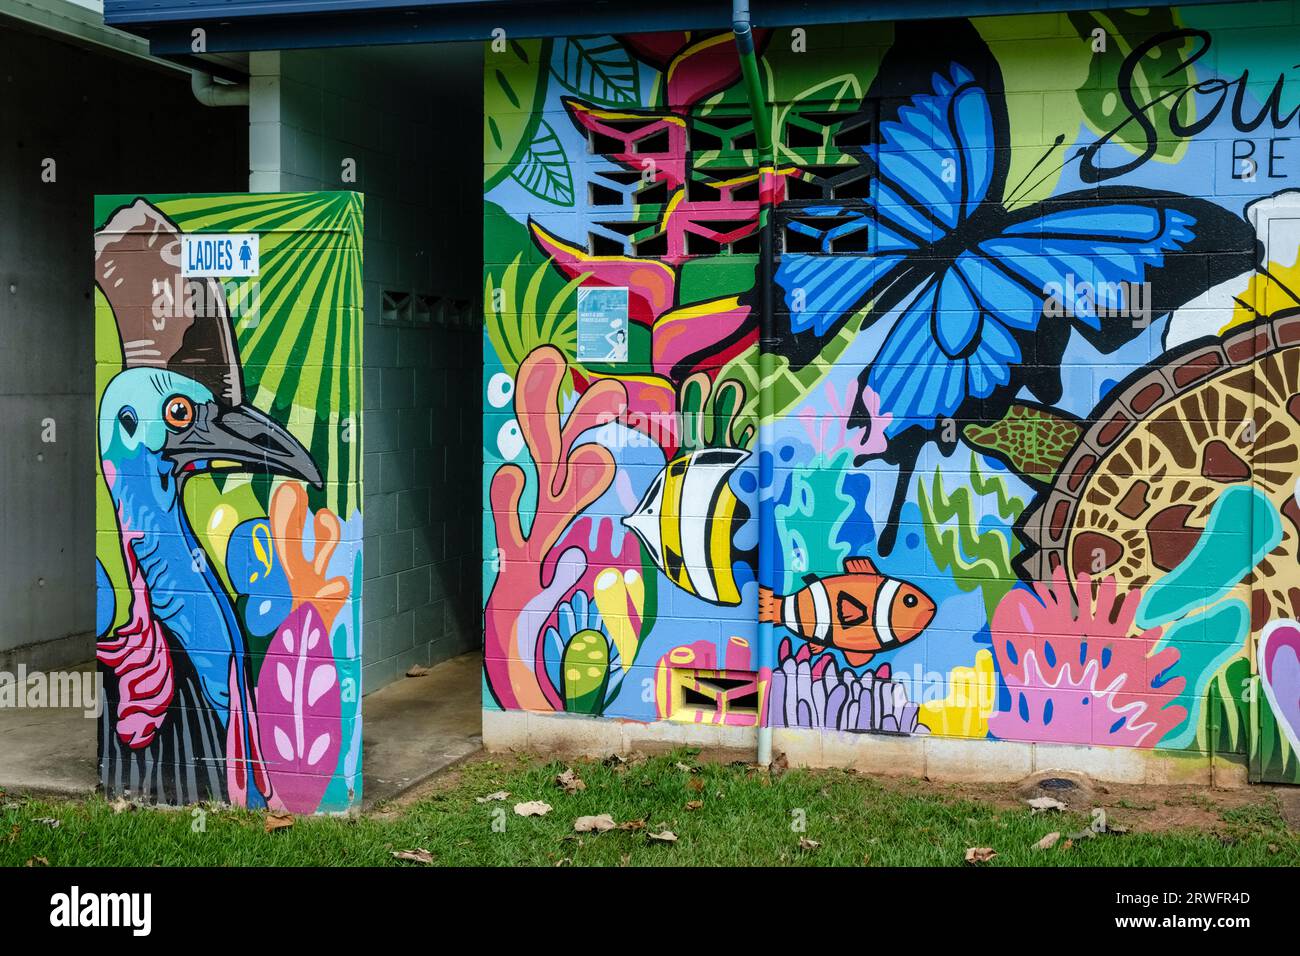 A beautiful mural on public toilets at South Mission Beach, Queensland, Australia Stock Photo